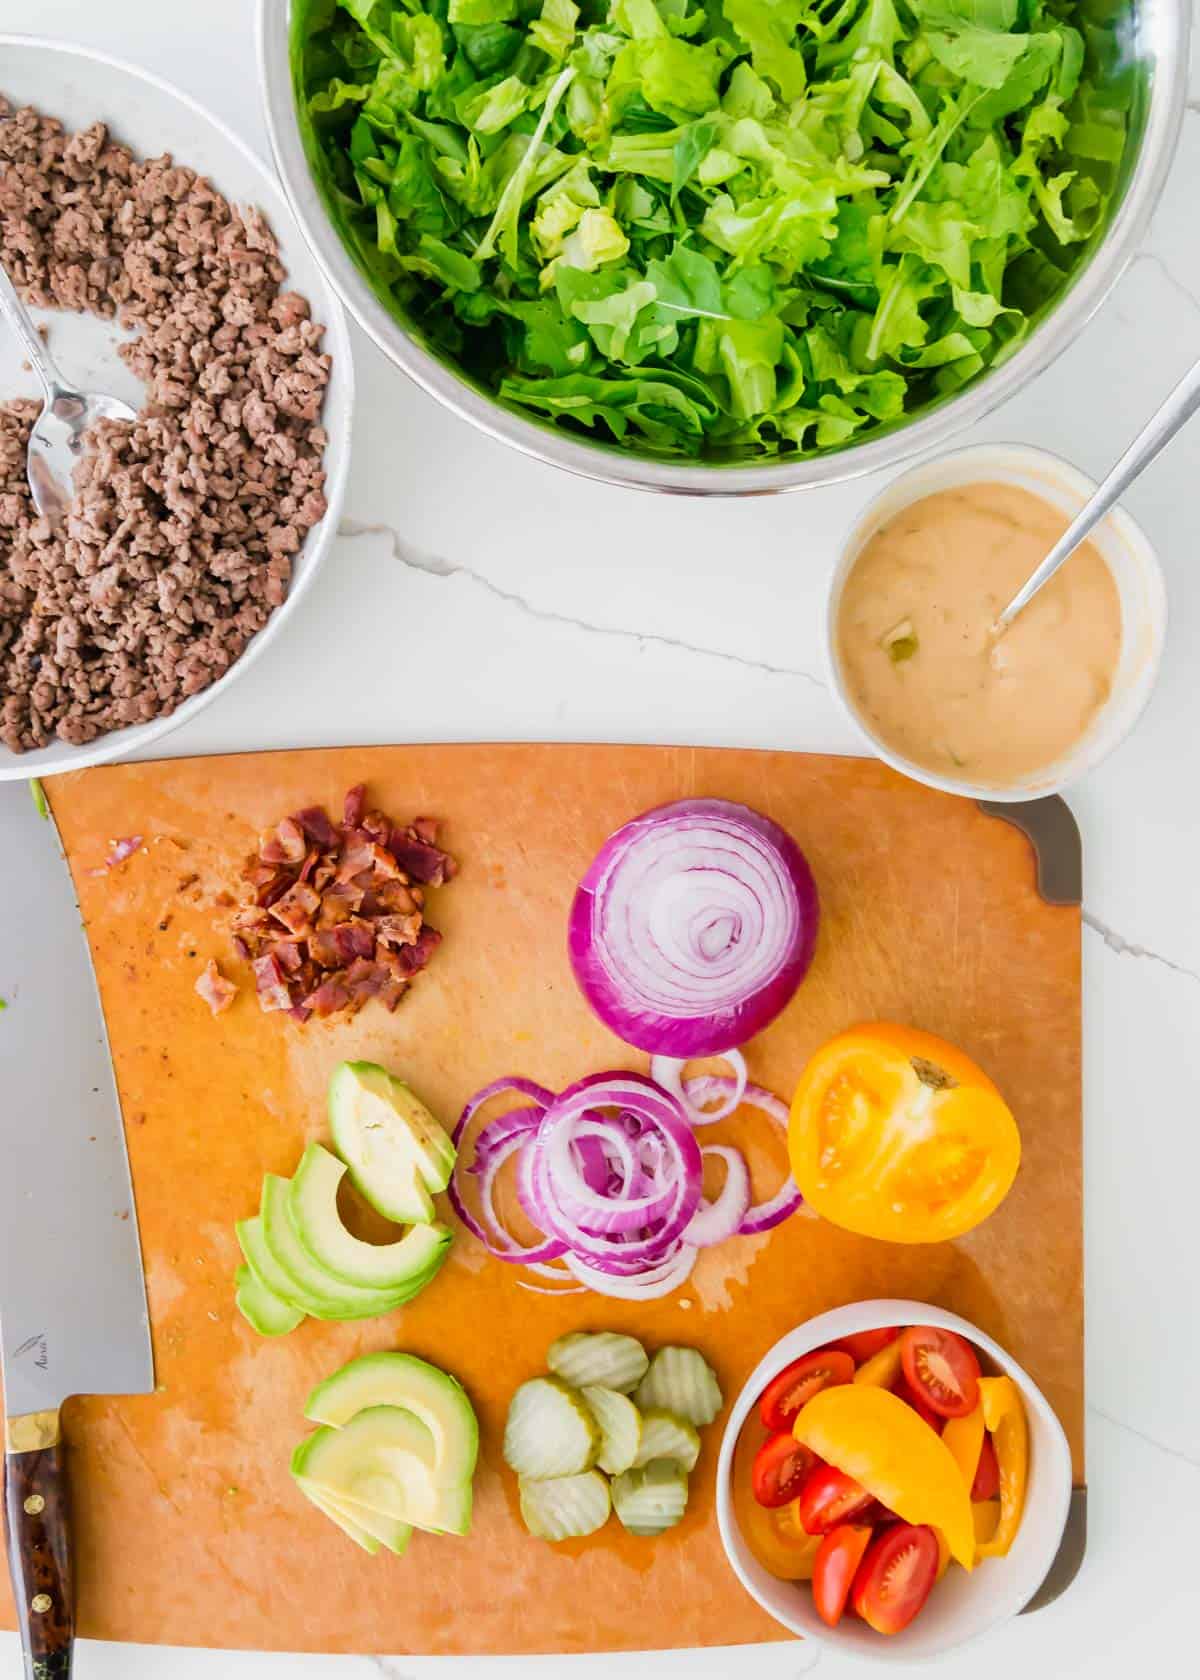 ingredients to make burgers in a bowl including ground beef, prepared lettuce greens, a homemade healthier "special sauce", red onions, tomatoes, bacon, pickles and avocado.